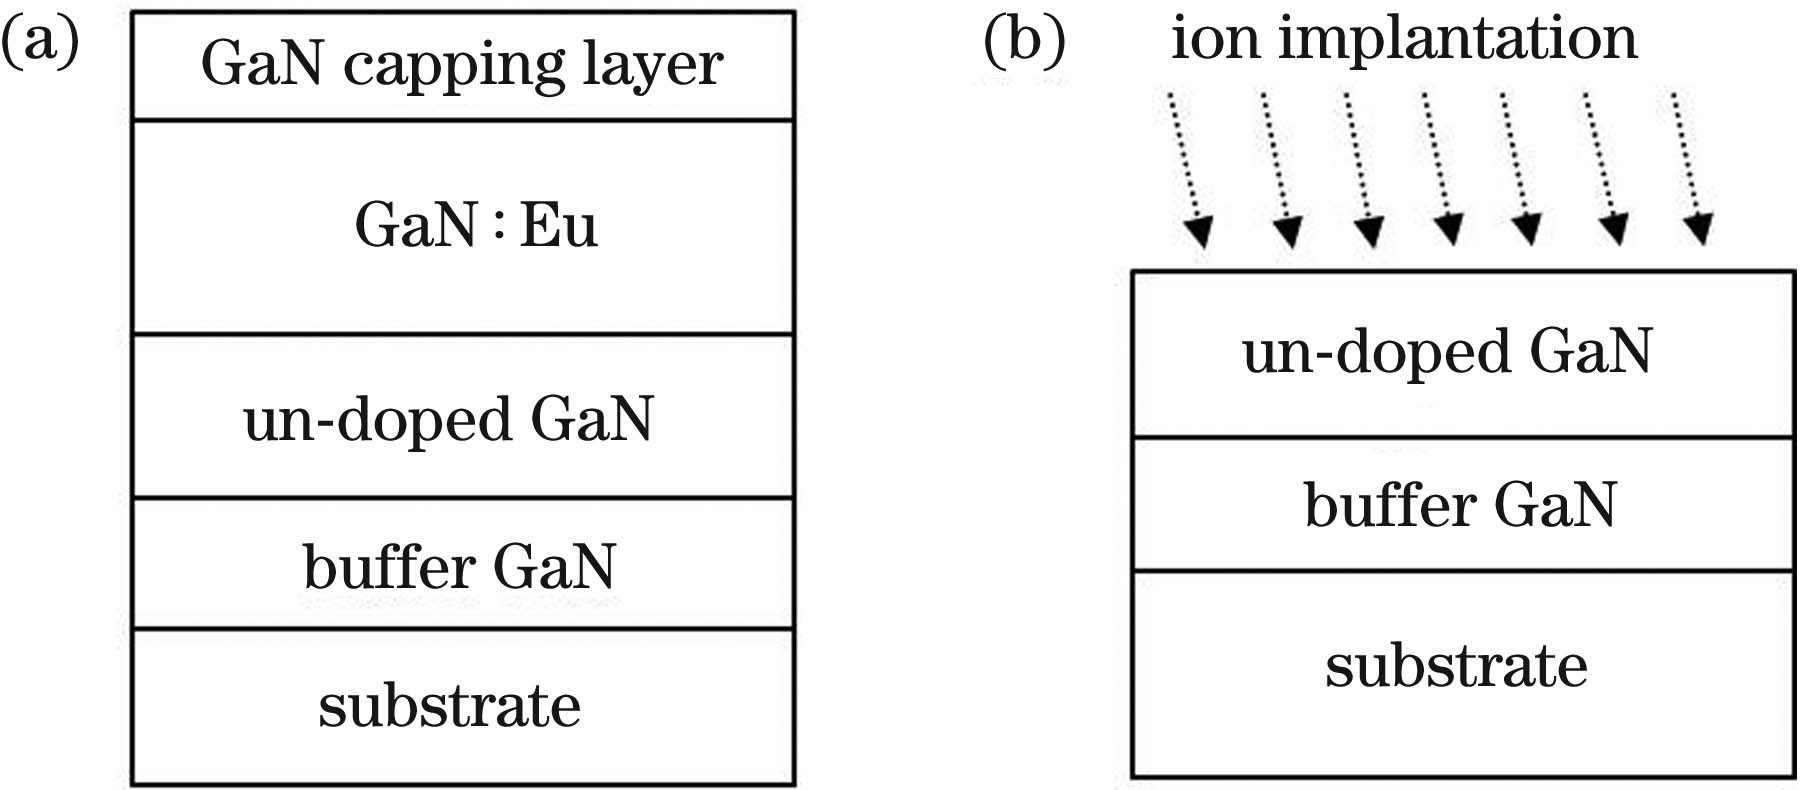 Structures of GaN∶Eu3+ materials prepared by methods of in-situ growth and ion implantation. (a) In-situ growth; (b) ion implantation